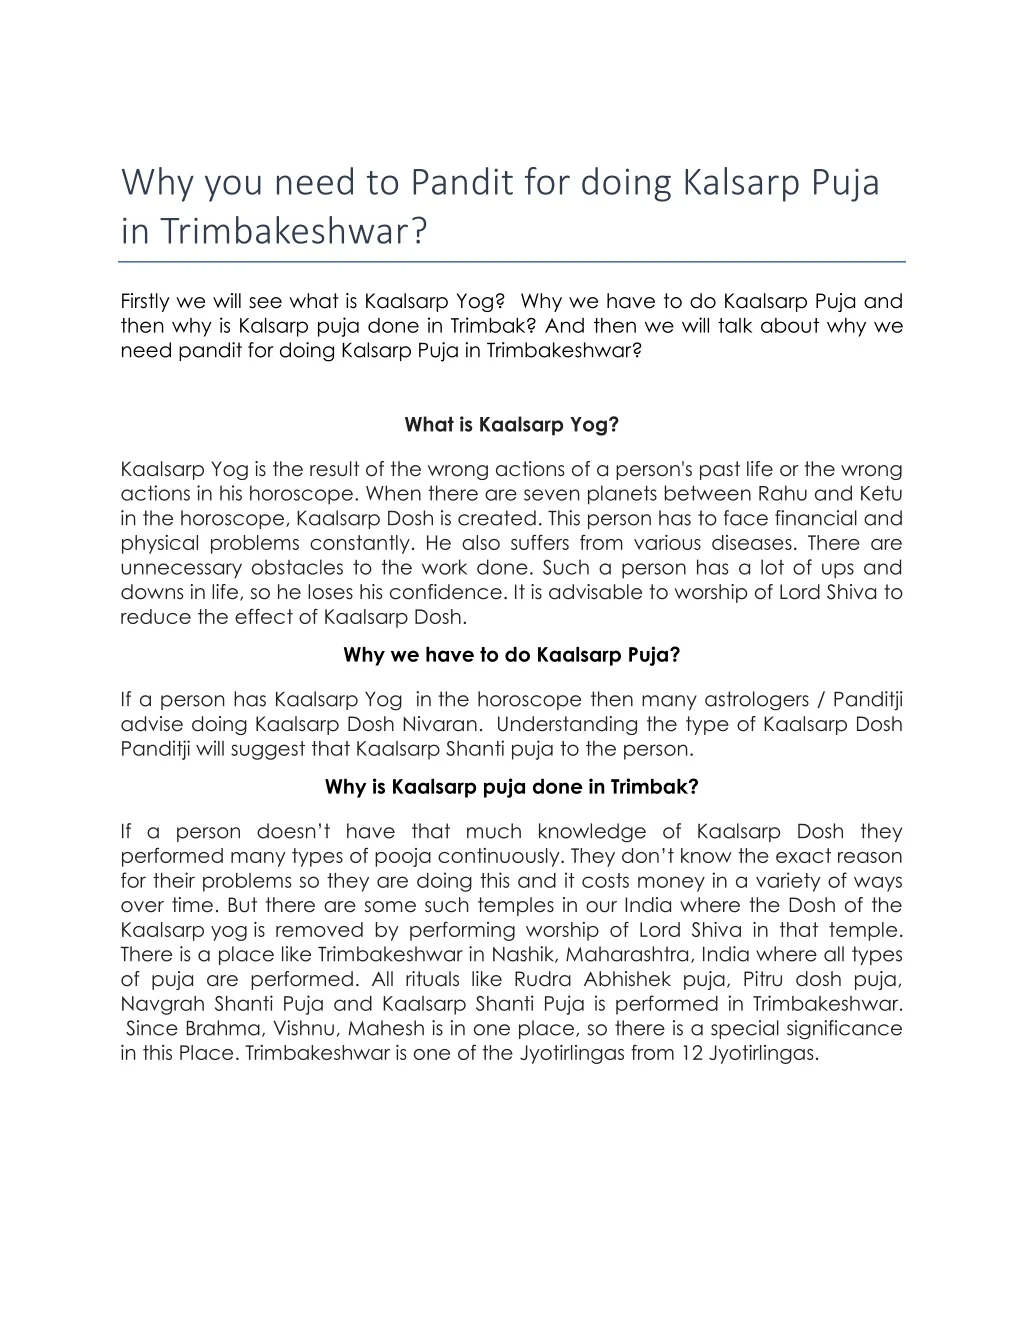 why you need to pandit for doing kalsarp puja